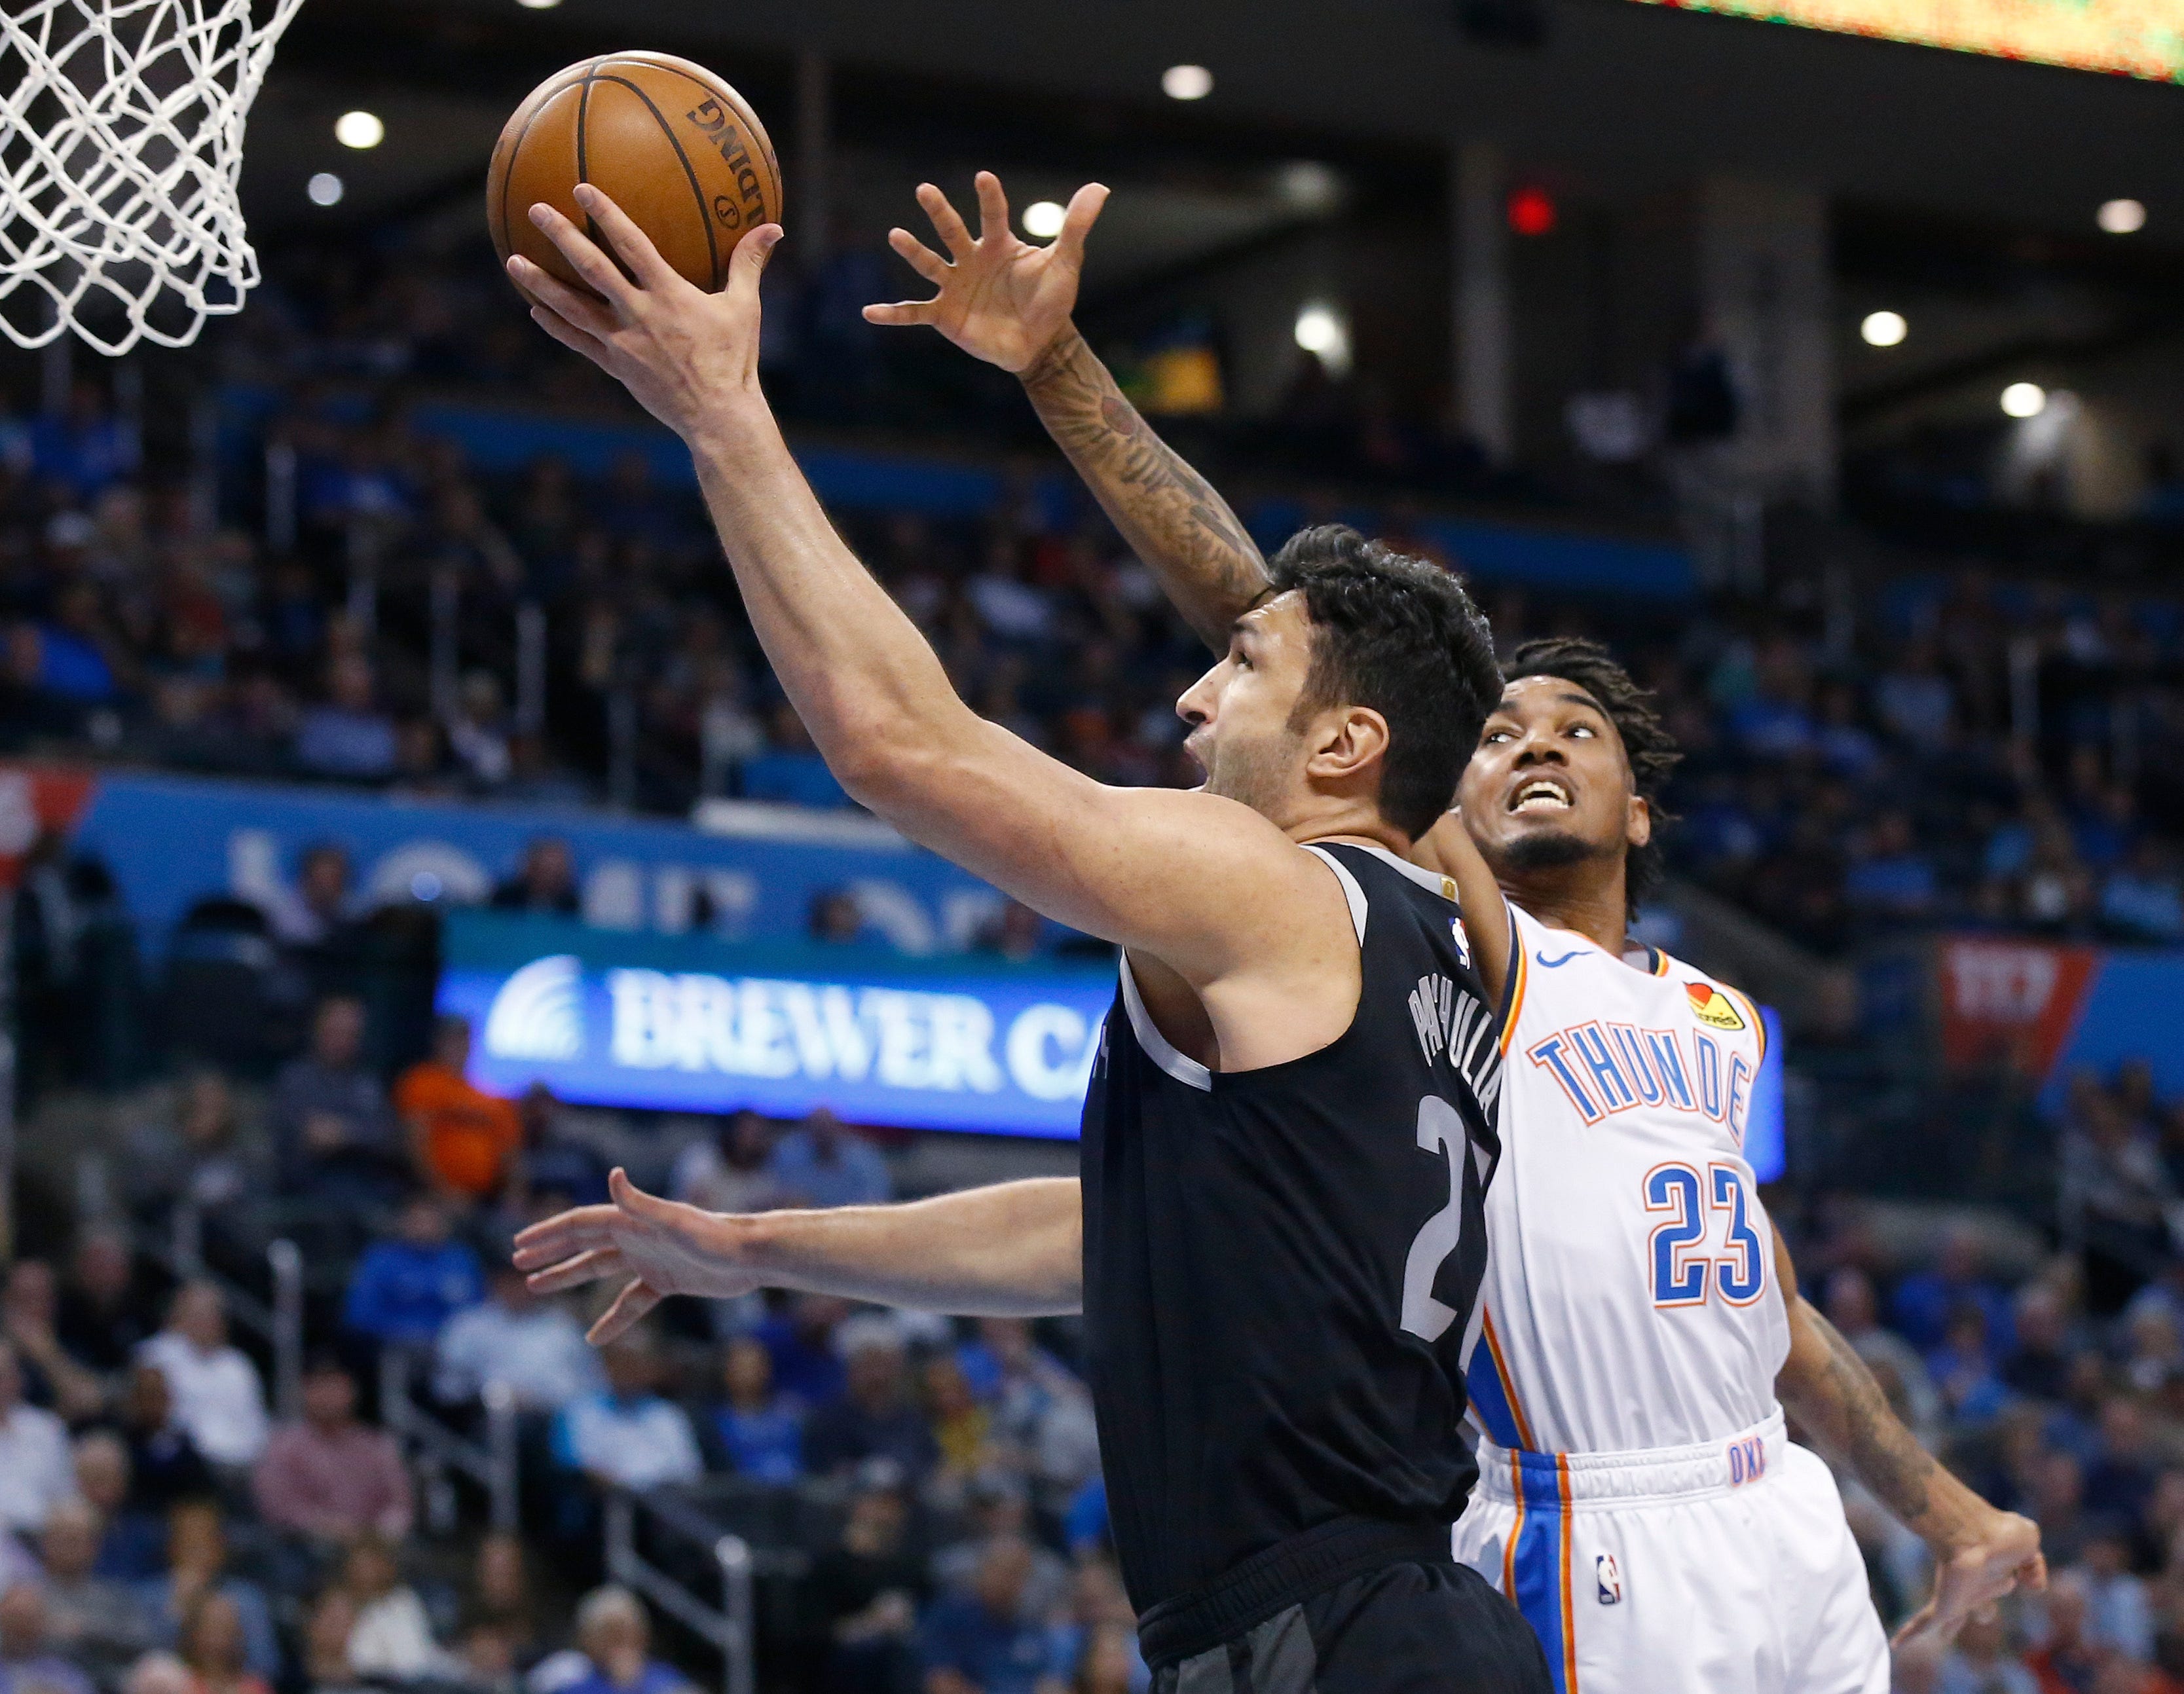 Detroit Pistons center Zaza Pachulia, left, shoots in front of Oklahoma City Thunder guard Terrance Ferguson (23) during the first half.